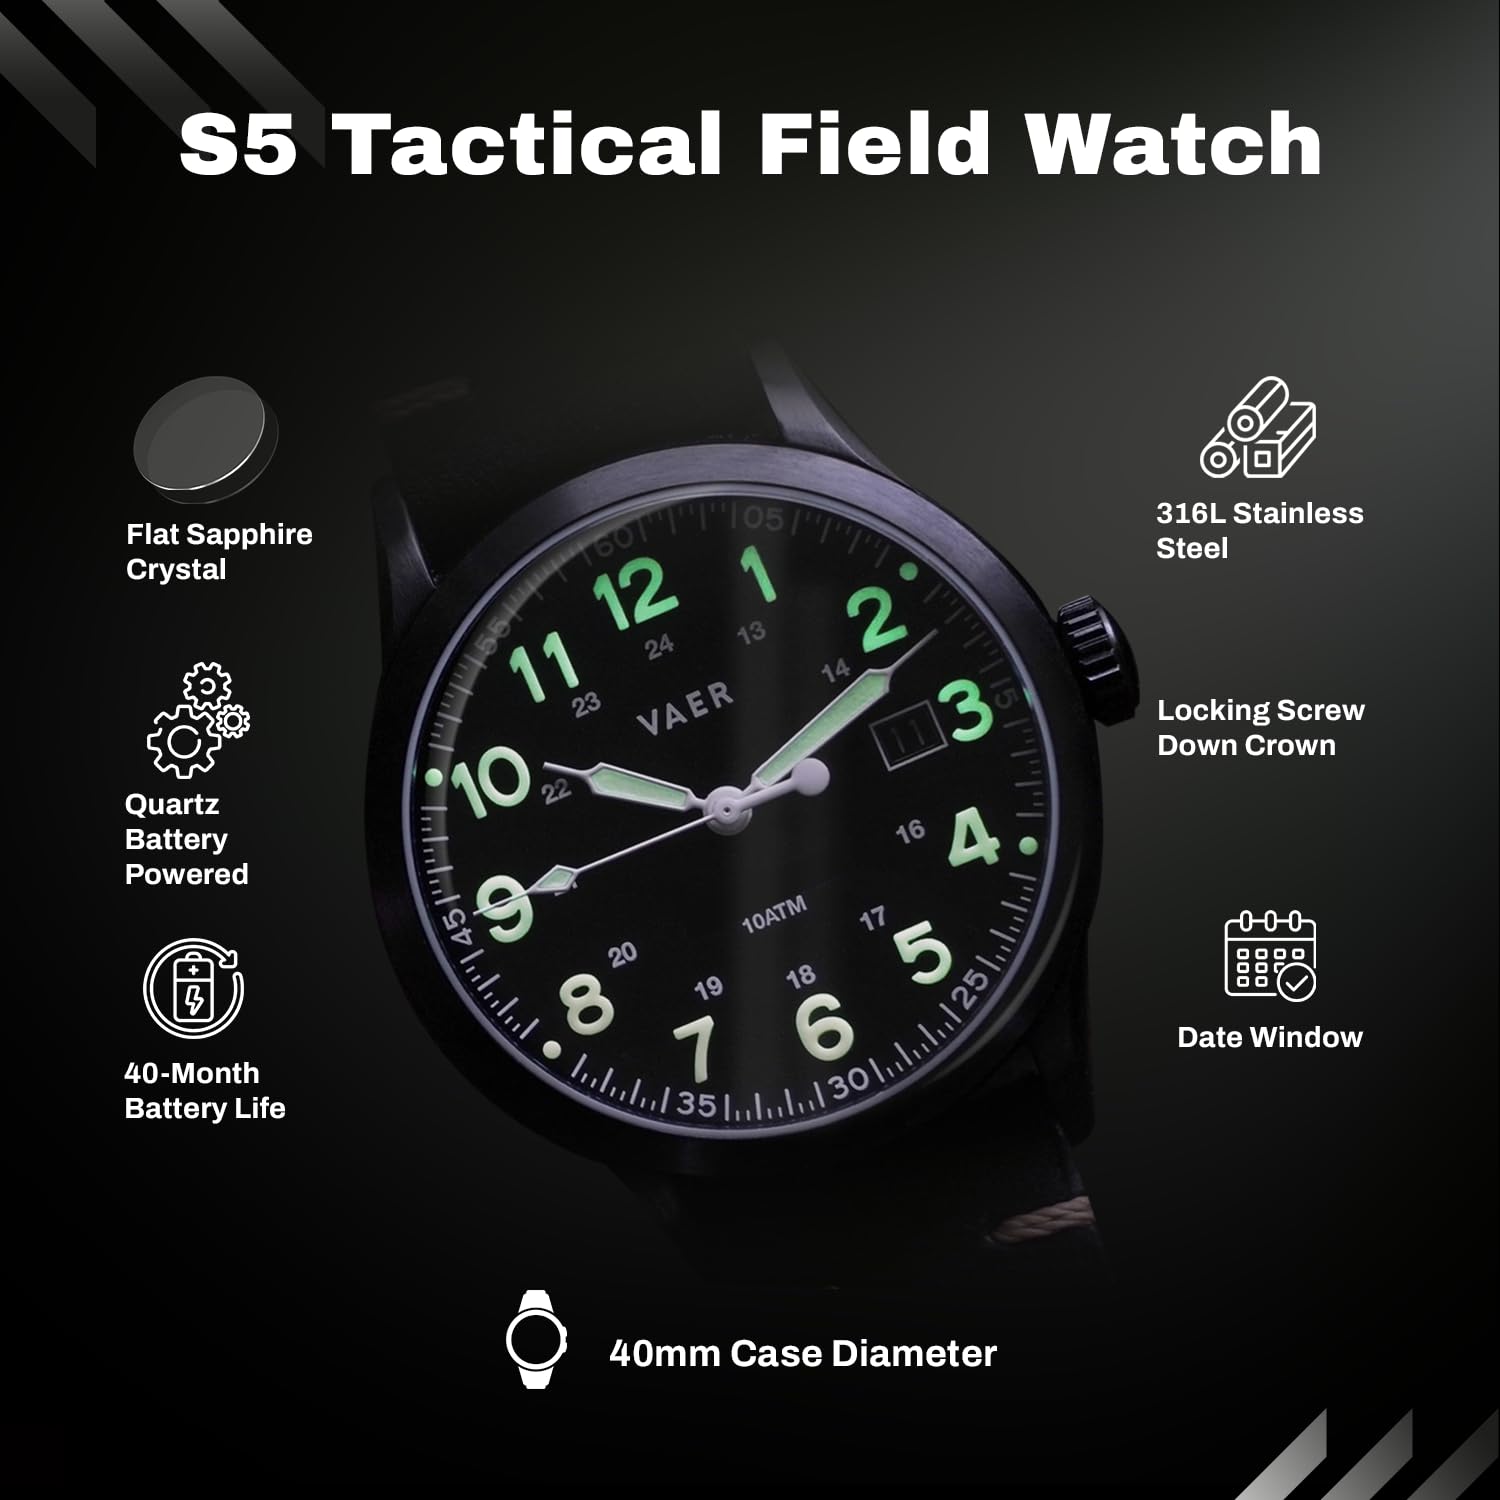 VAER S5/S3 Tactical Field Men's Watch - Military-Inspired Design, Quartz Movement, 10ATM Water-Resistant, Strong Night Glow, Interchangeable Straps, Vintage 40mm or 36mm Case, 2-Yr Waterproof Warranty